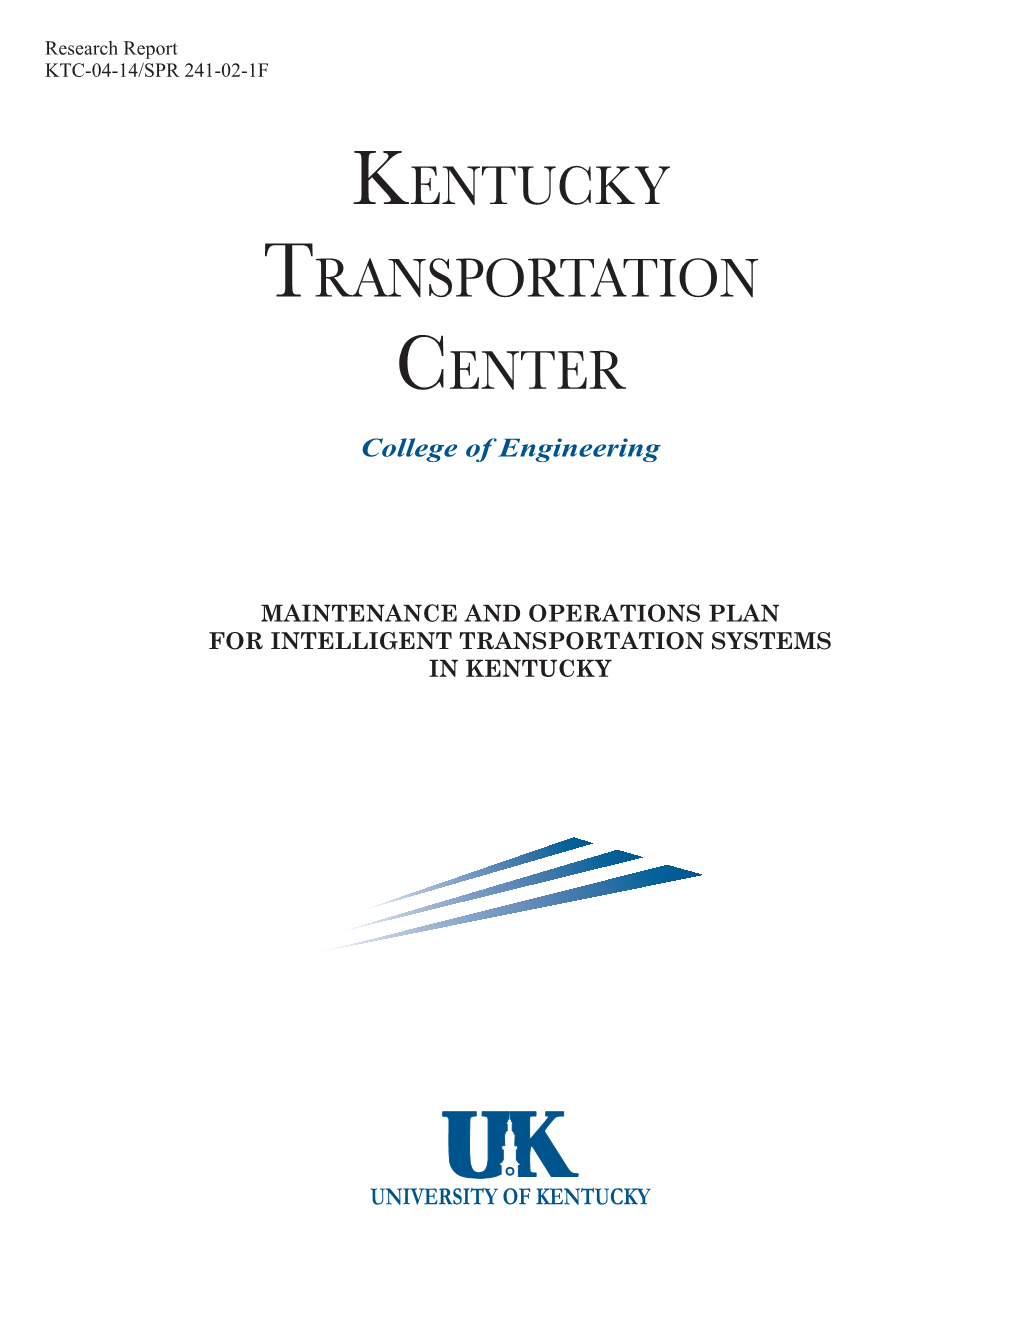 Maintenance and Operations Plan for Intelligent Transportation Systems in Kentucky